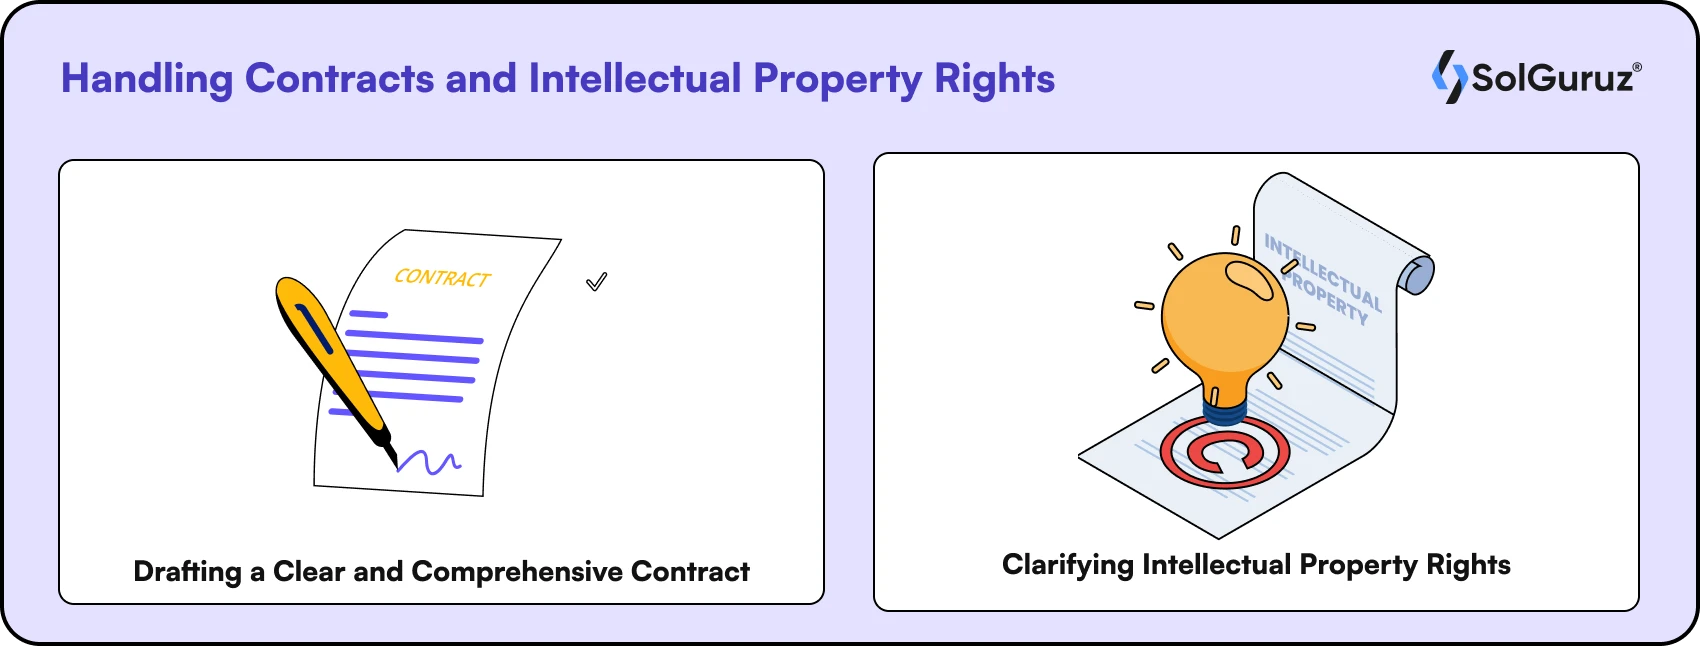 Handling Contracts and Intellectual Property Rights in the Software Project